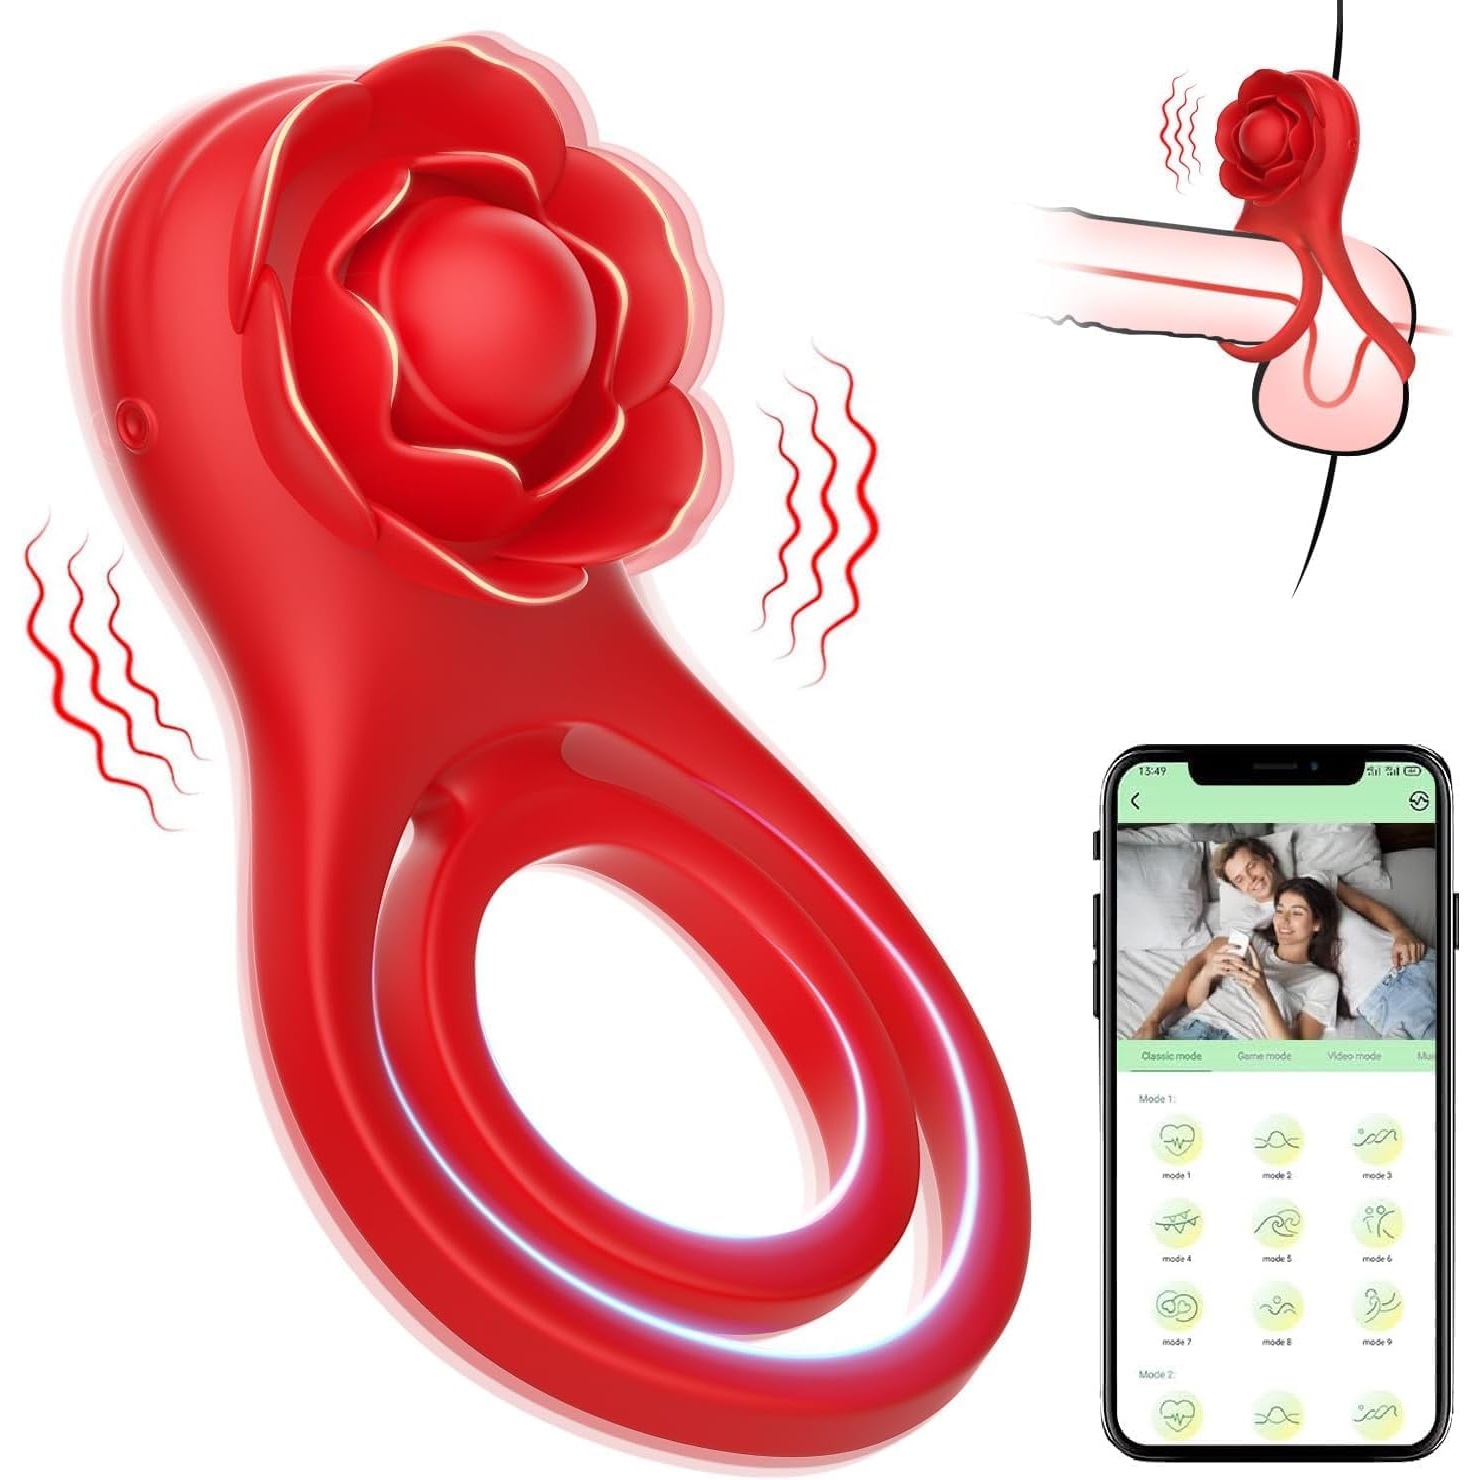 Pleasant Experience Cock Rings, Lasting Rooster ring Electro stimulate Function Waterproof Couples Entertainment Sex Toys, Sleeve Ring Gifts Y24